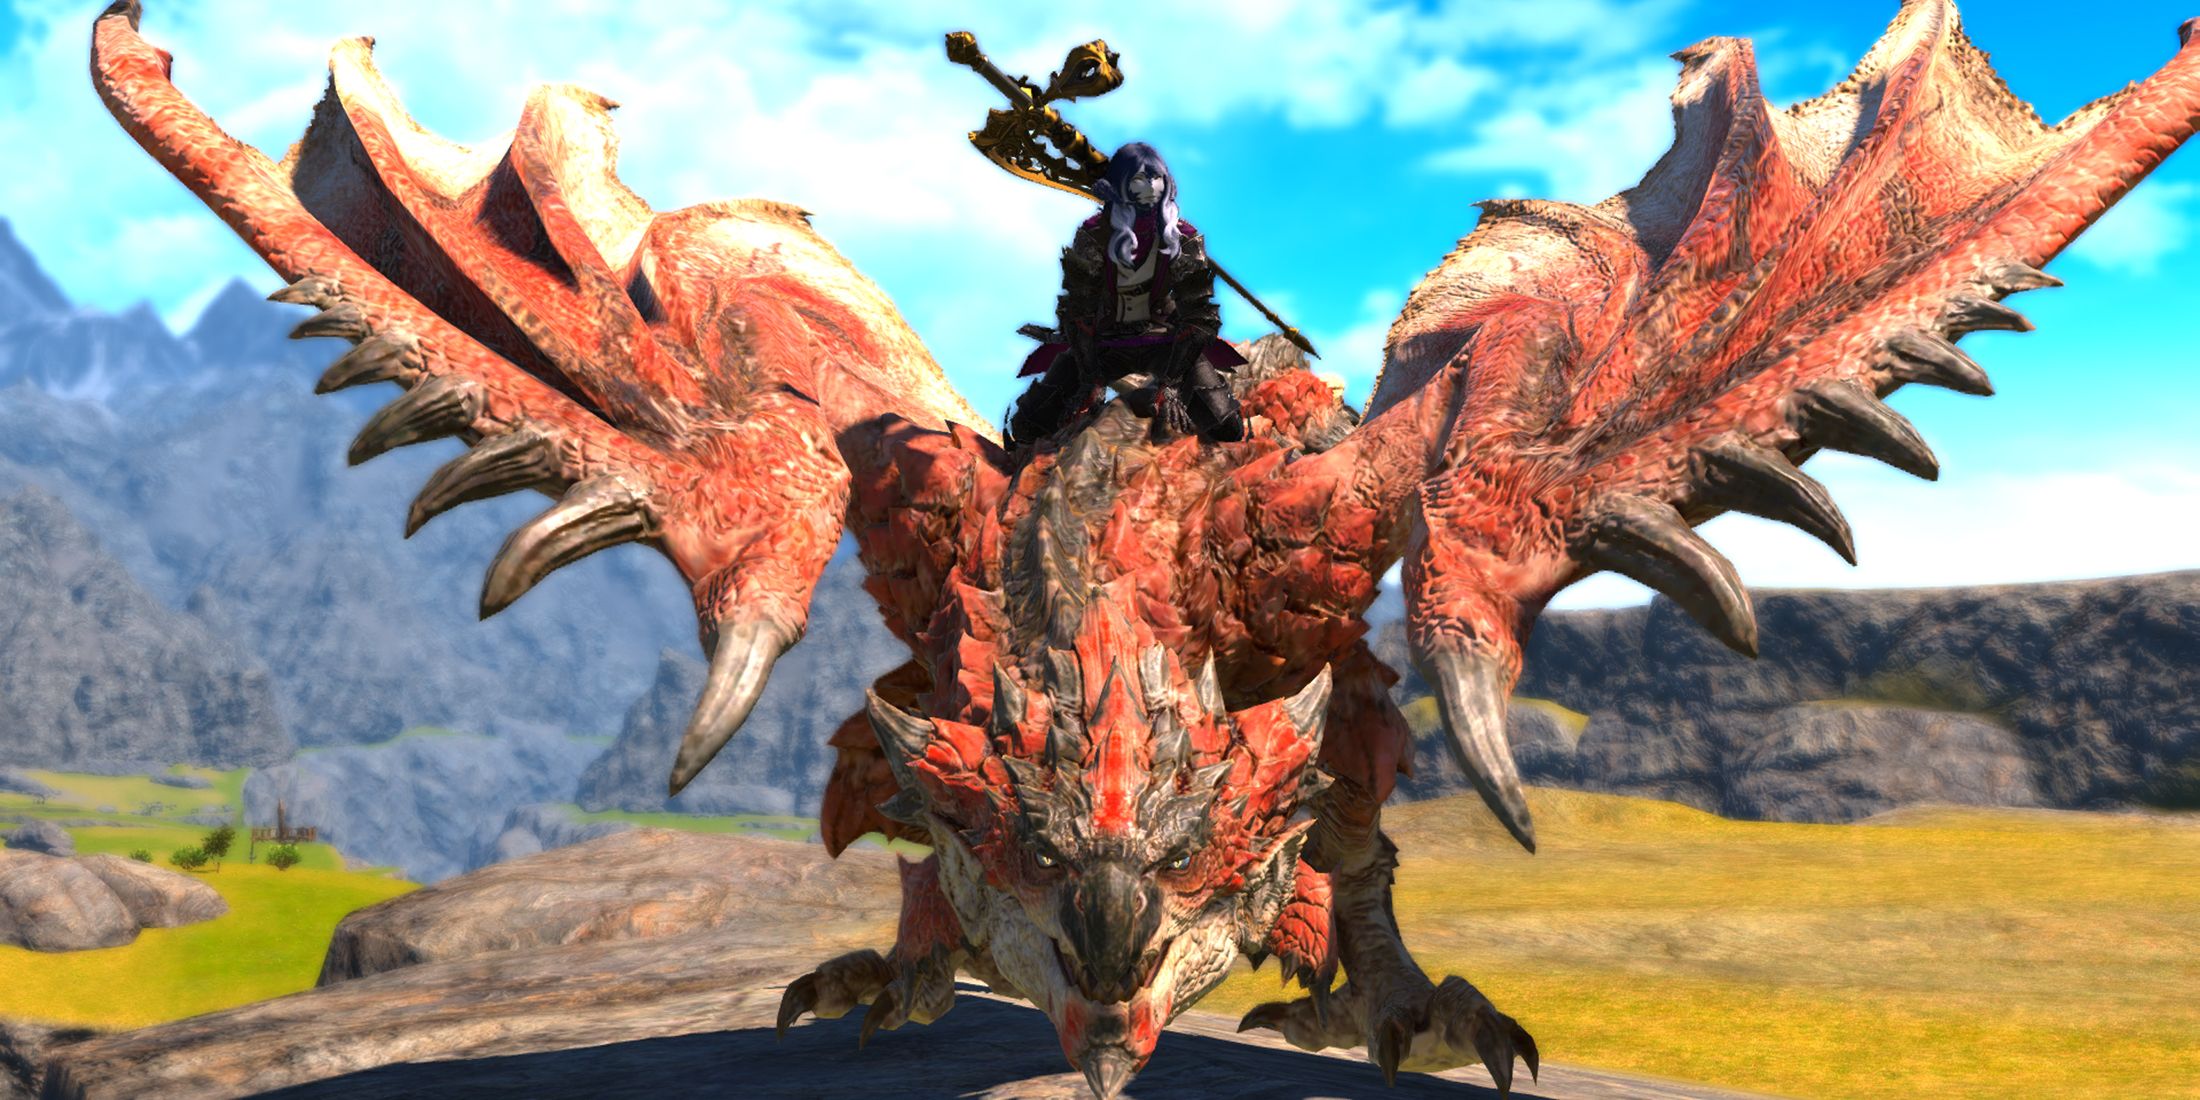 Final Fantasy 14: How To Get The Rathalos Mount